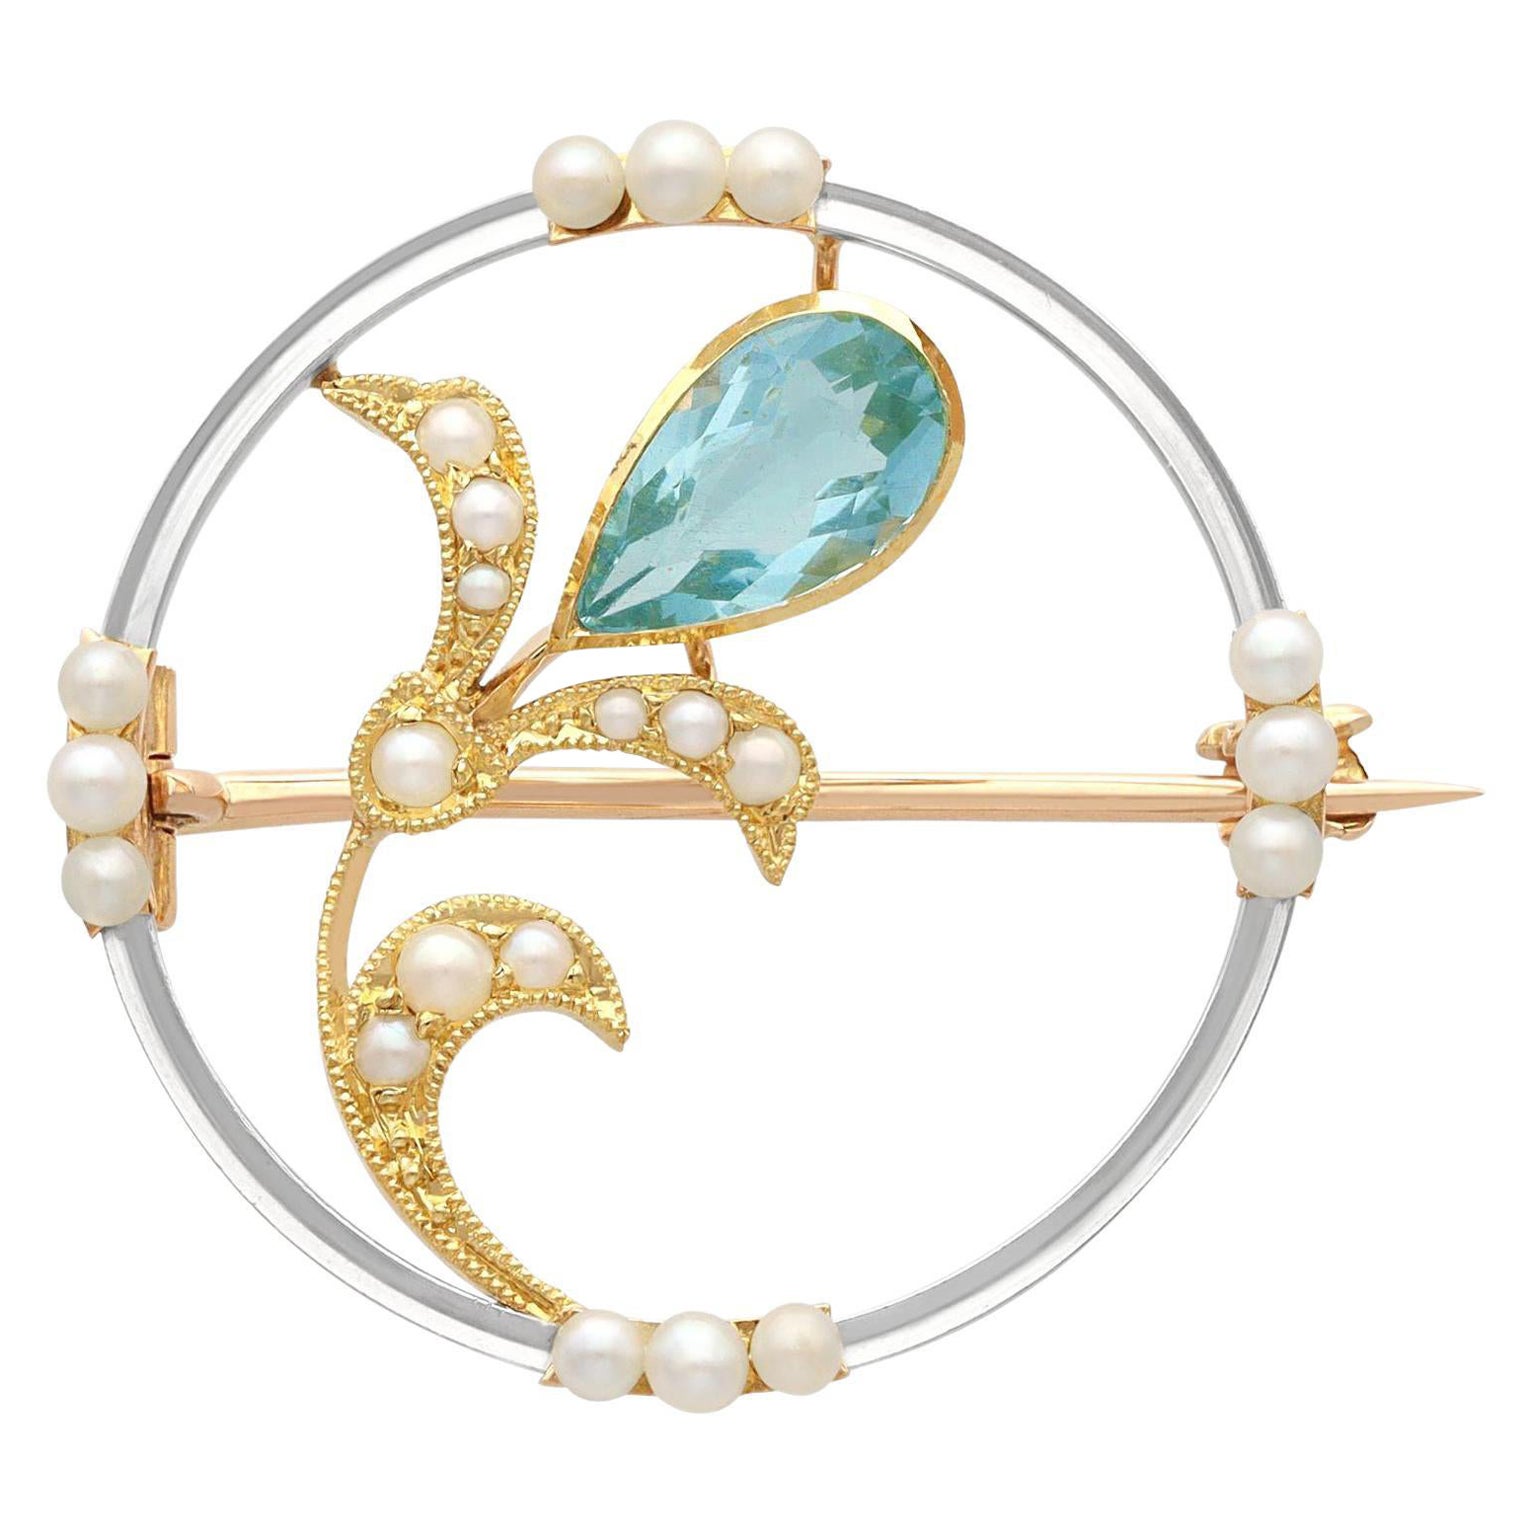 Antique Art Nouveau Aquamarine and Pearl Yellow Gold Brooch For Sale